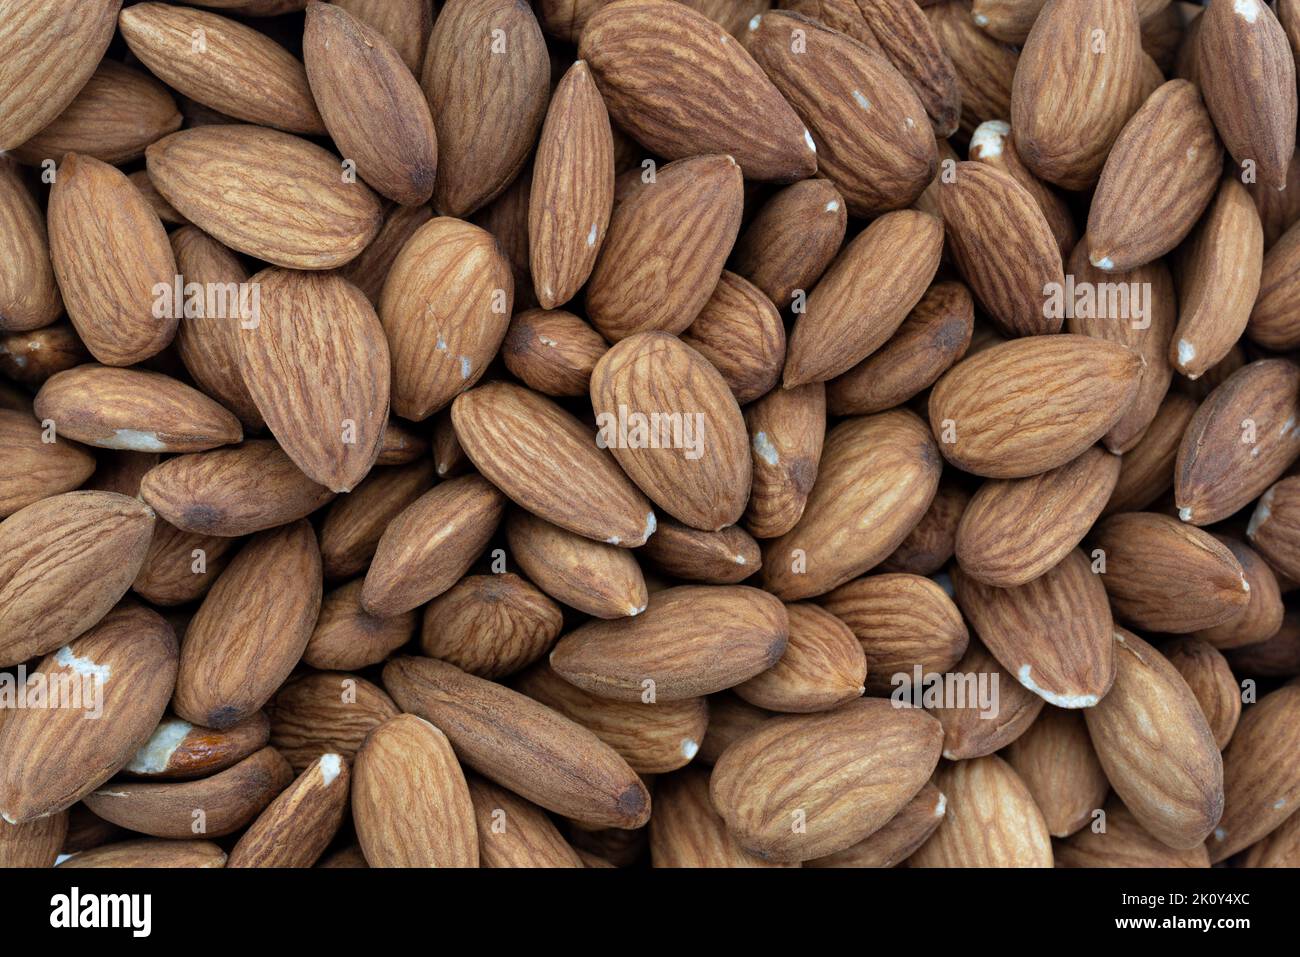 Top view of a group of almond nuts. Stock Photo